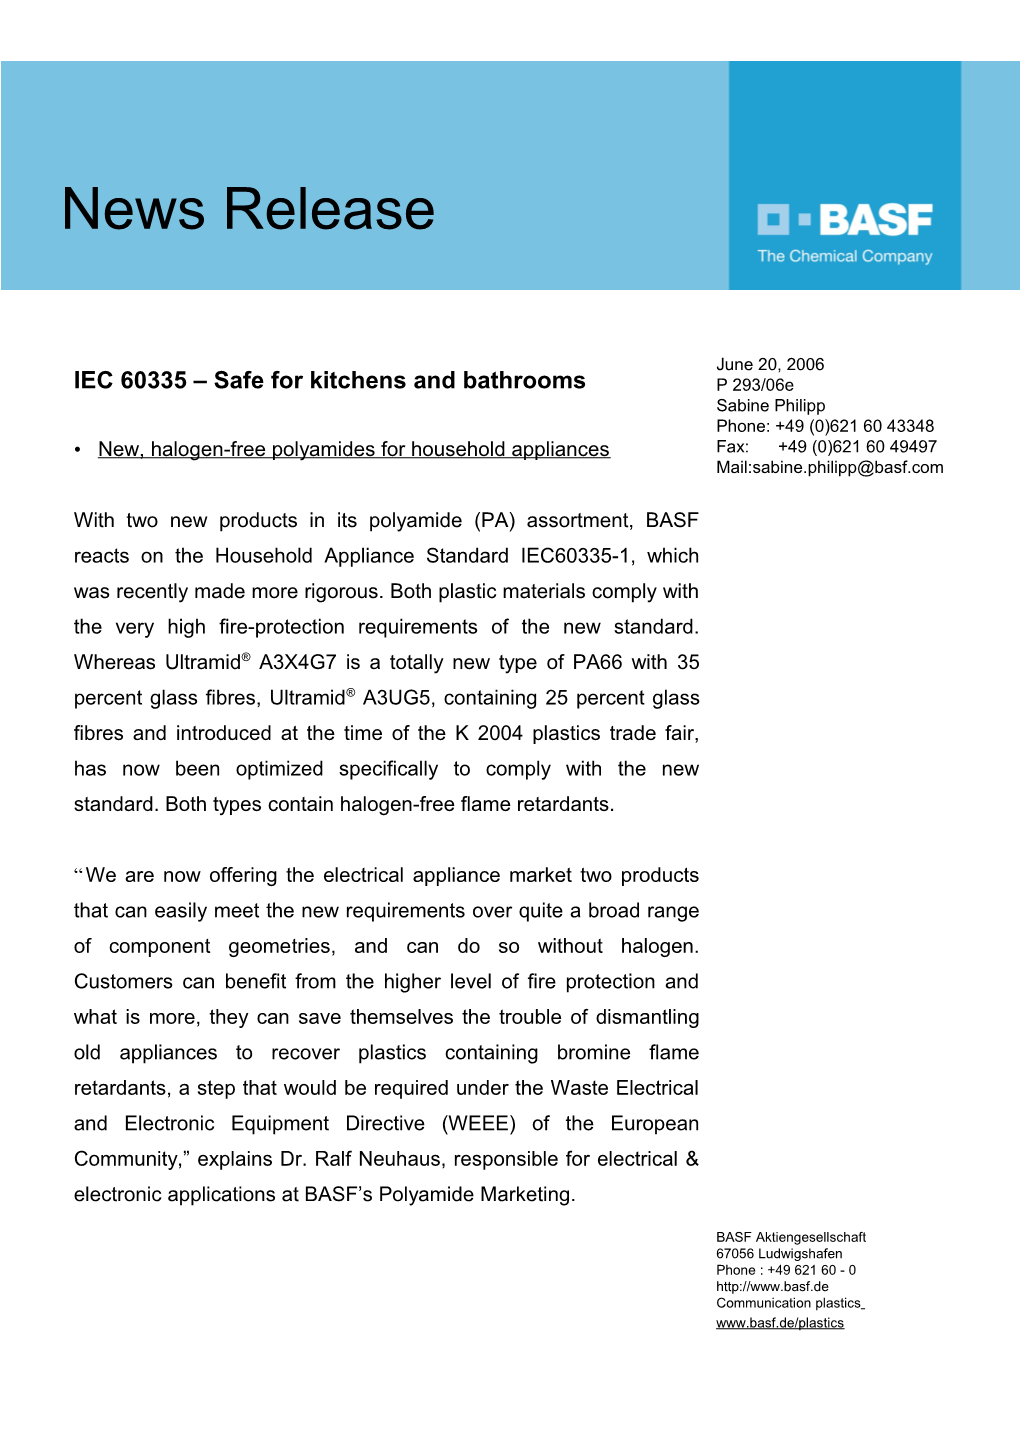 IEC 60335 Safe for Kitchens and Bathrooms